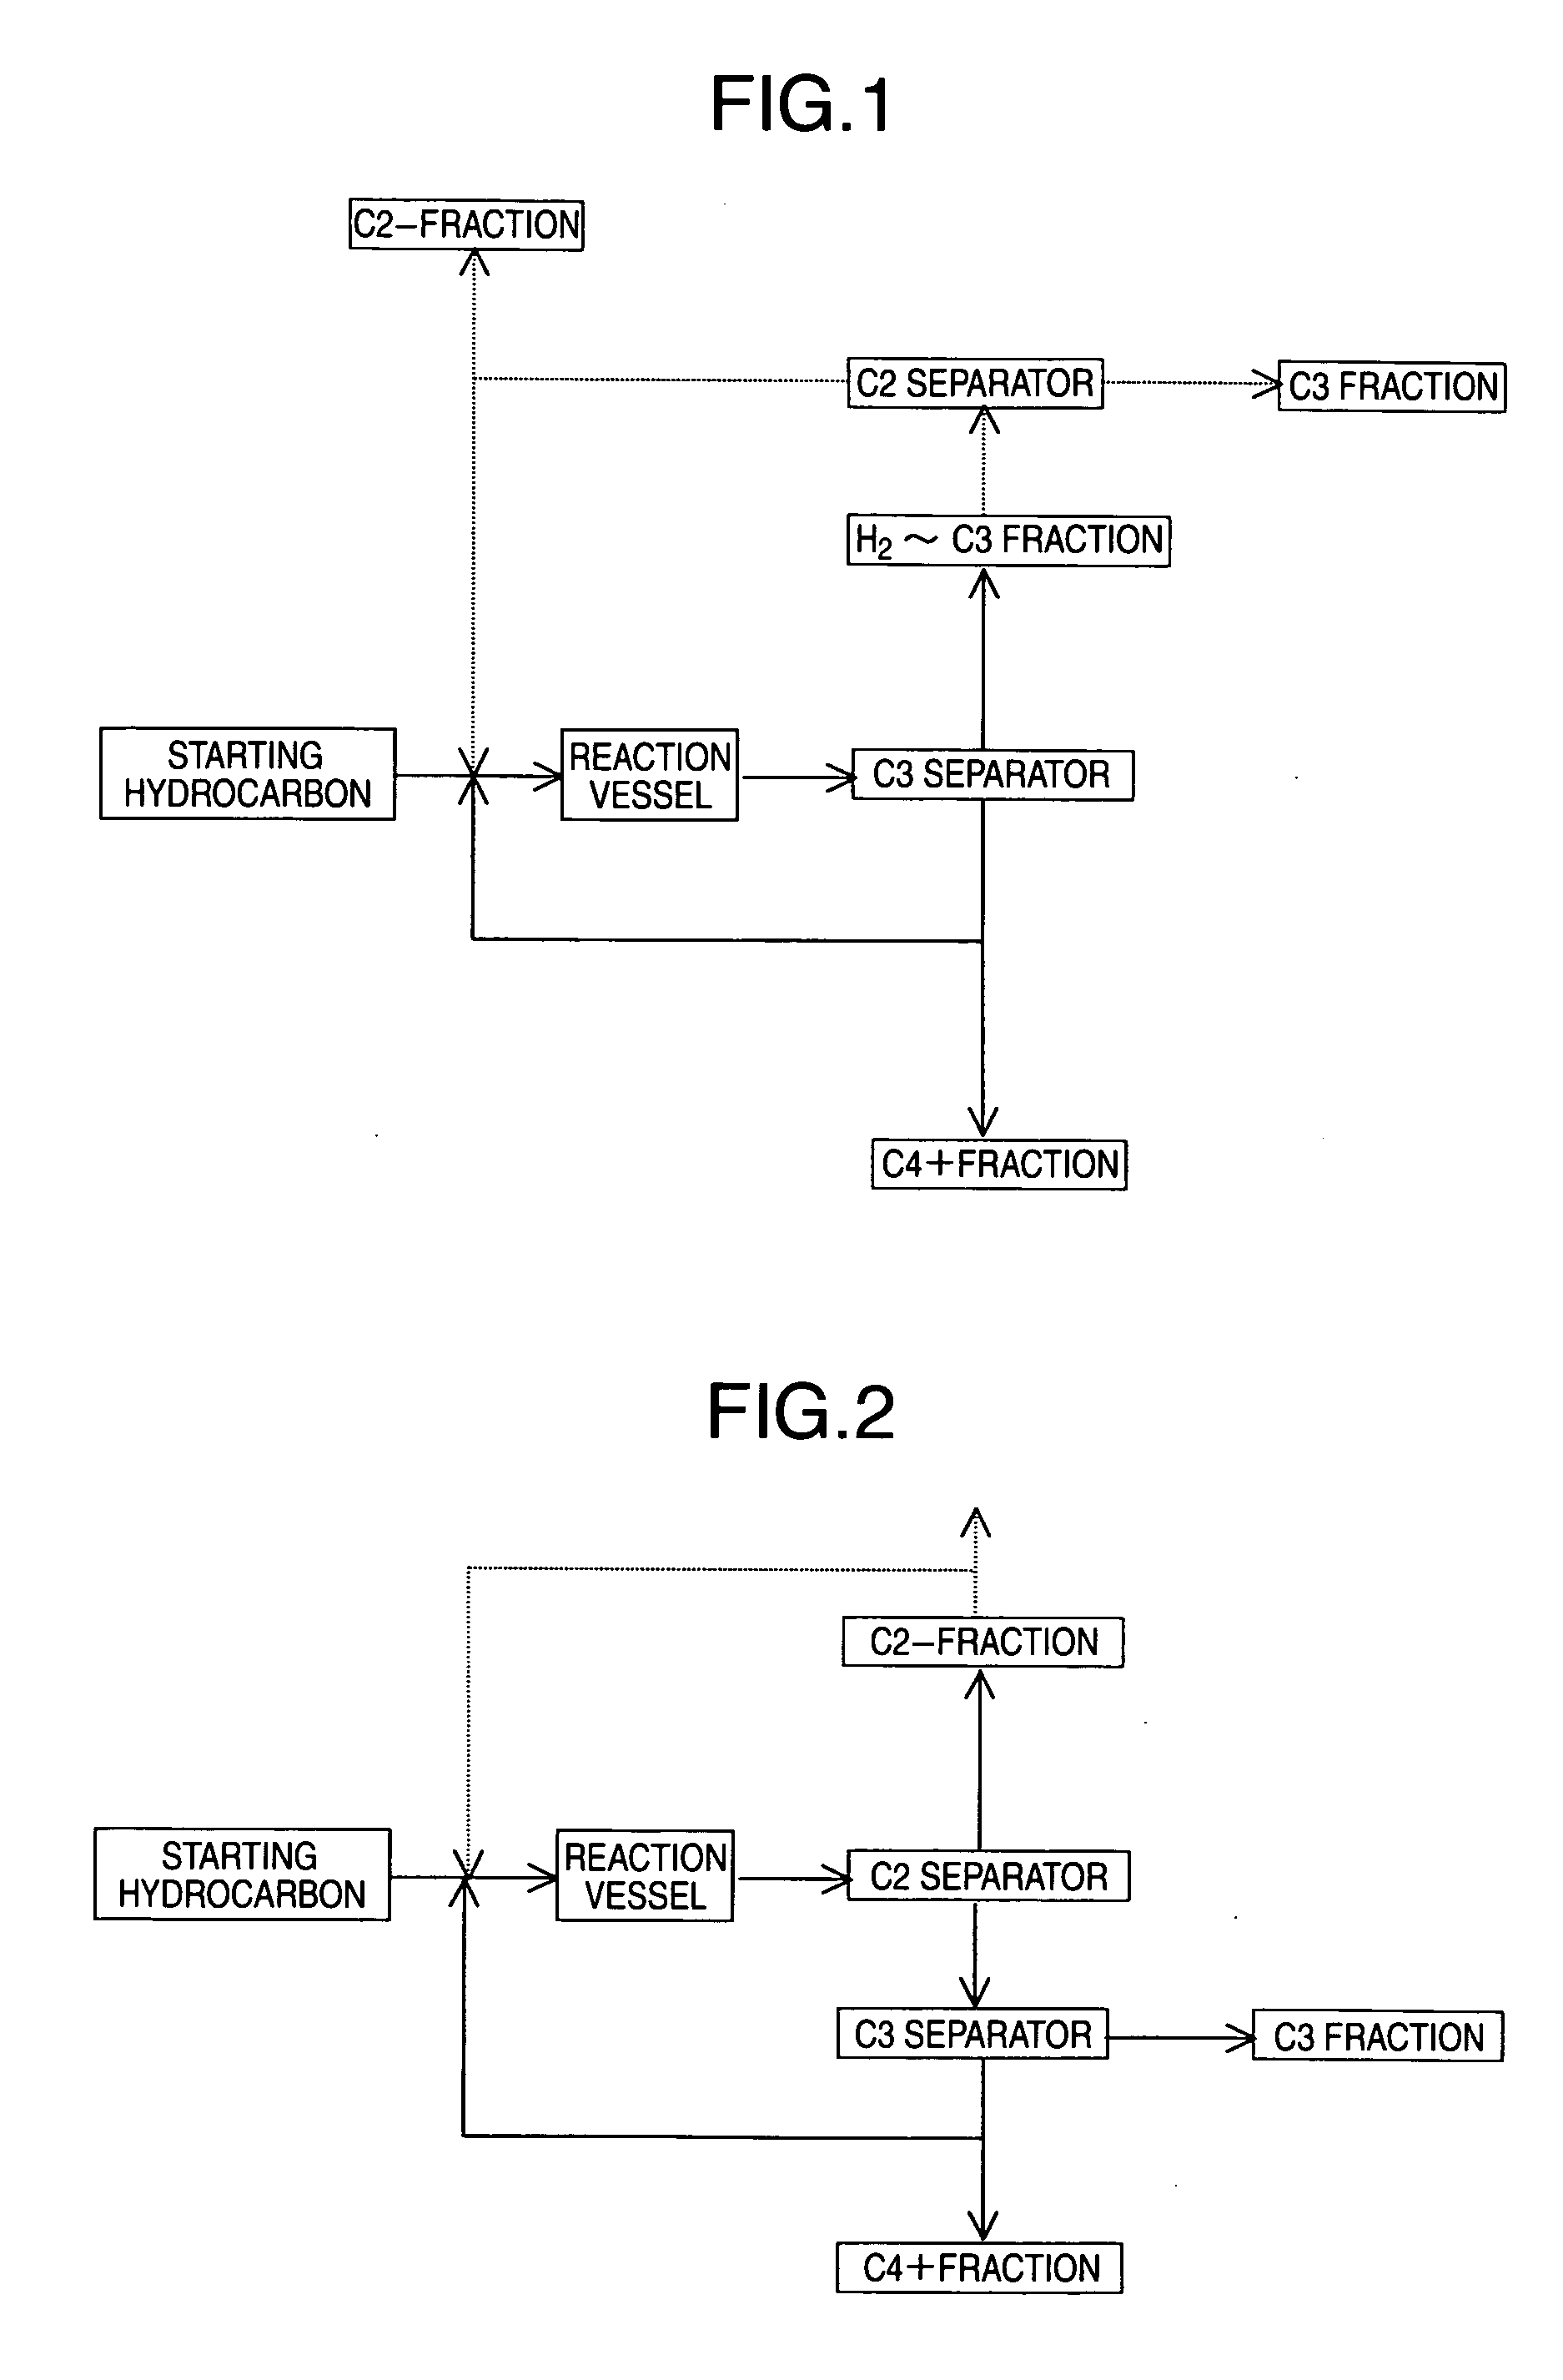 Process for Producing Ethylene and Propylene